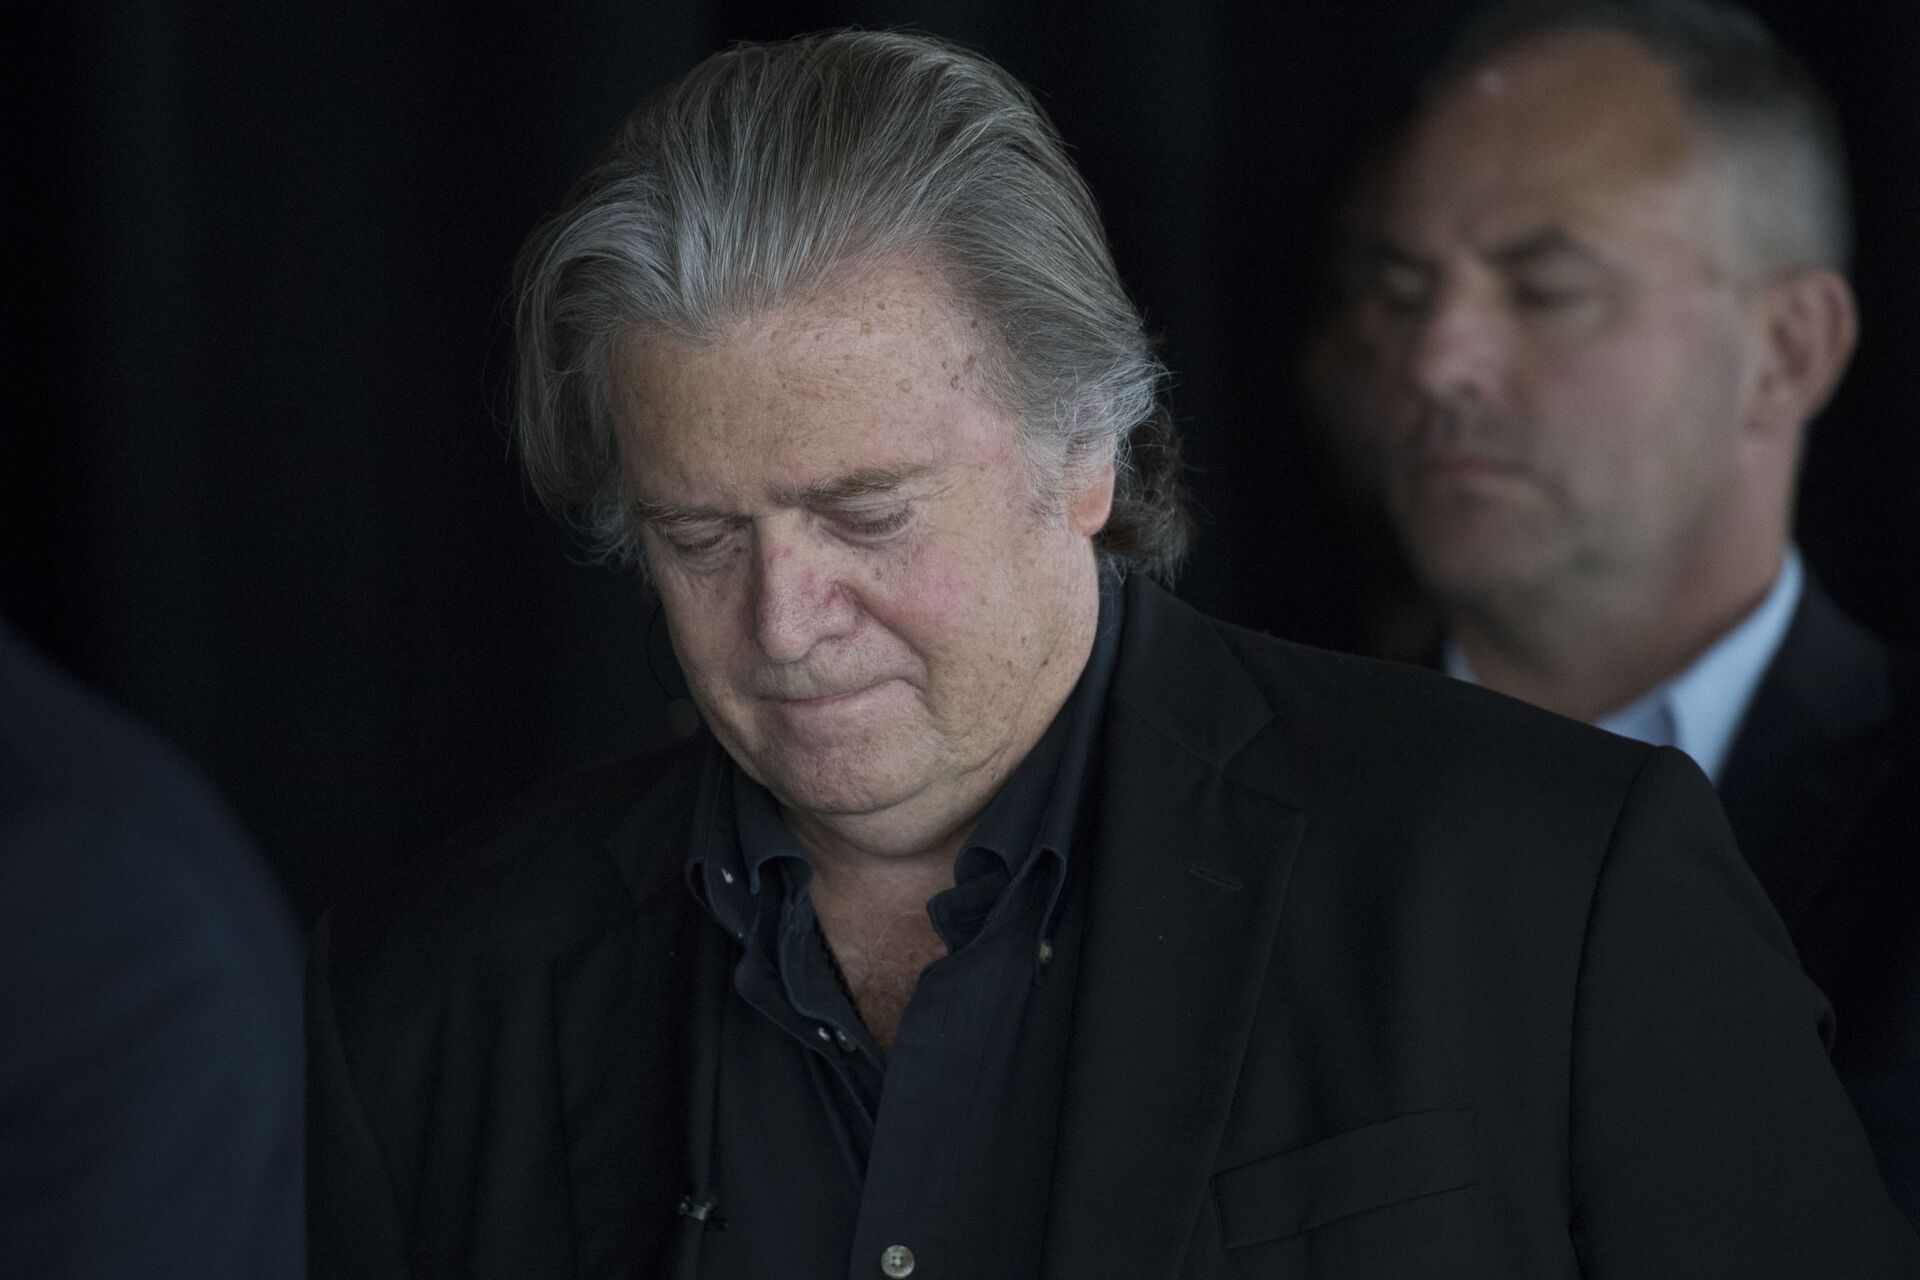 President Donald Trump's former chief strategist Steve Bannon waits to be introduced during an ideas festival sponsored by The Economist, Saturday, Sept. 15, 2018, in New York. Bannon said he's surprised the #MeToo movement hasn't had more impact on corporate America.  - Sputnik International, 1920, 22.10.2021